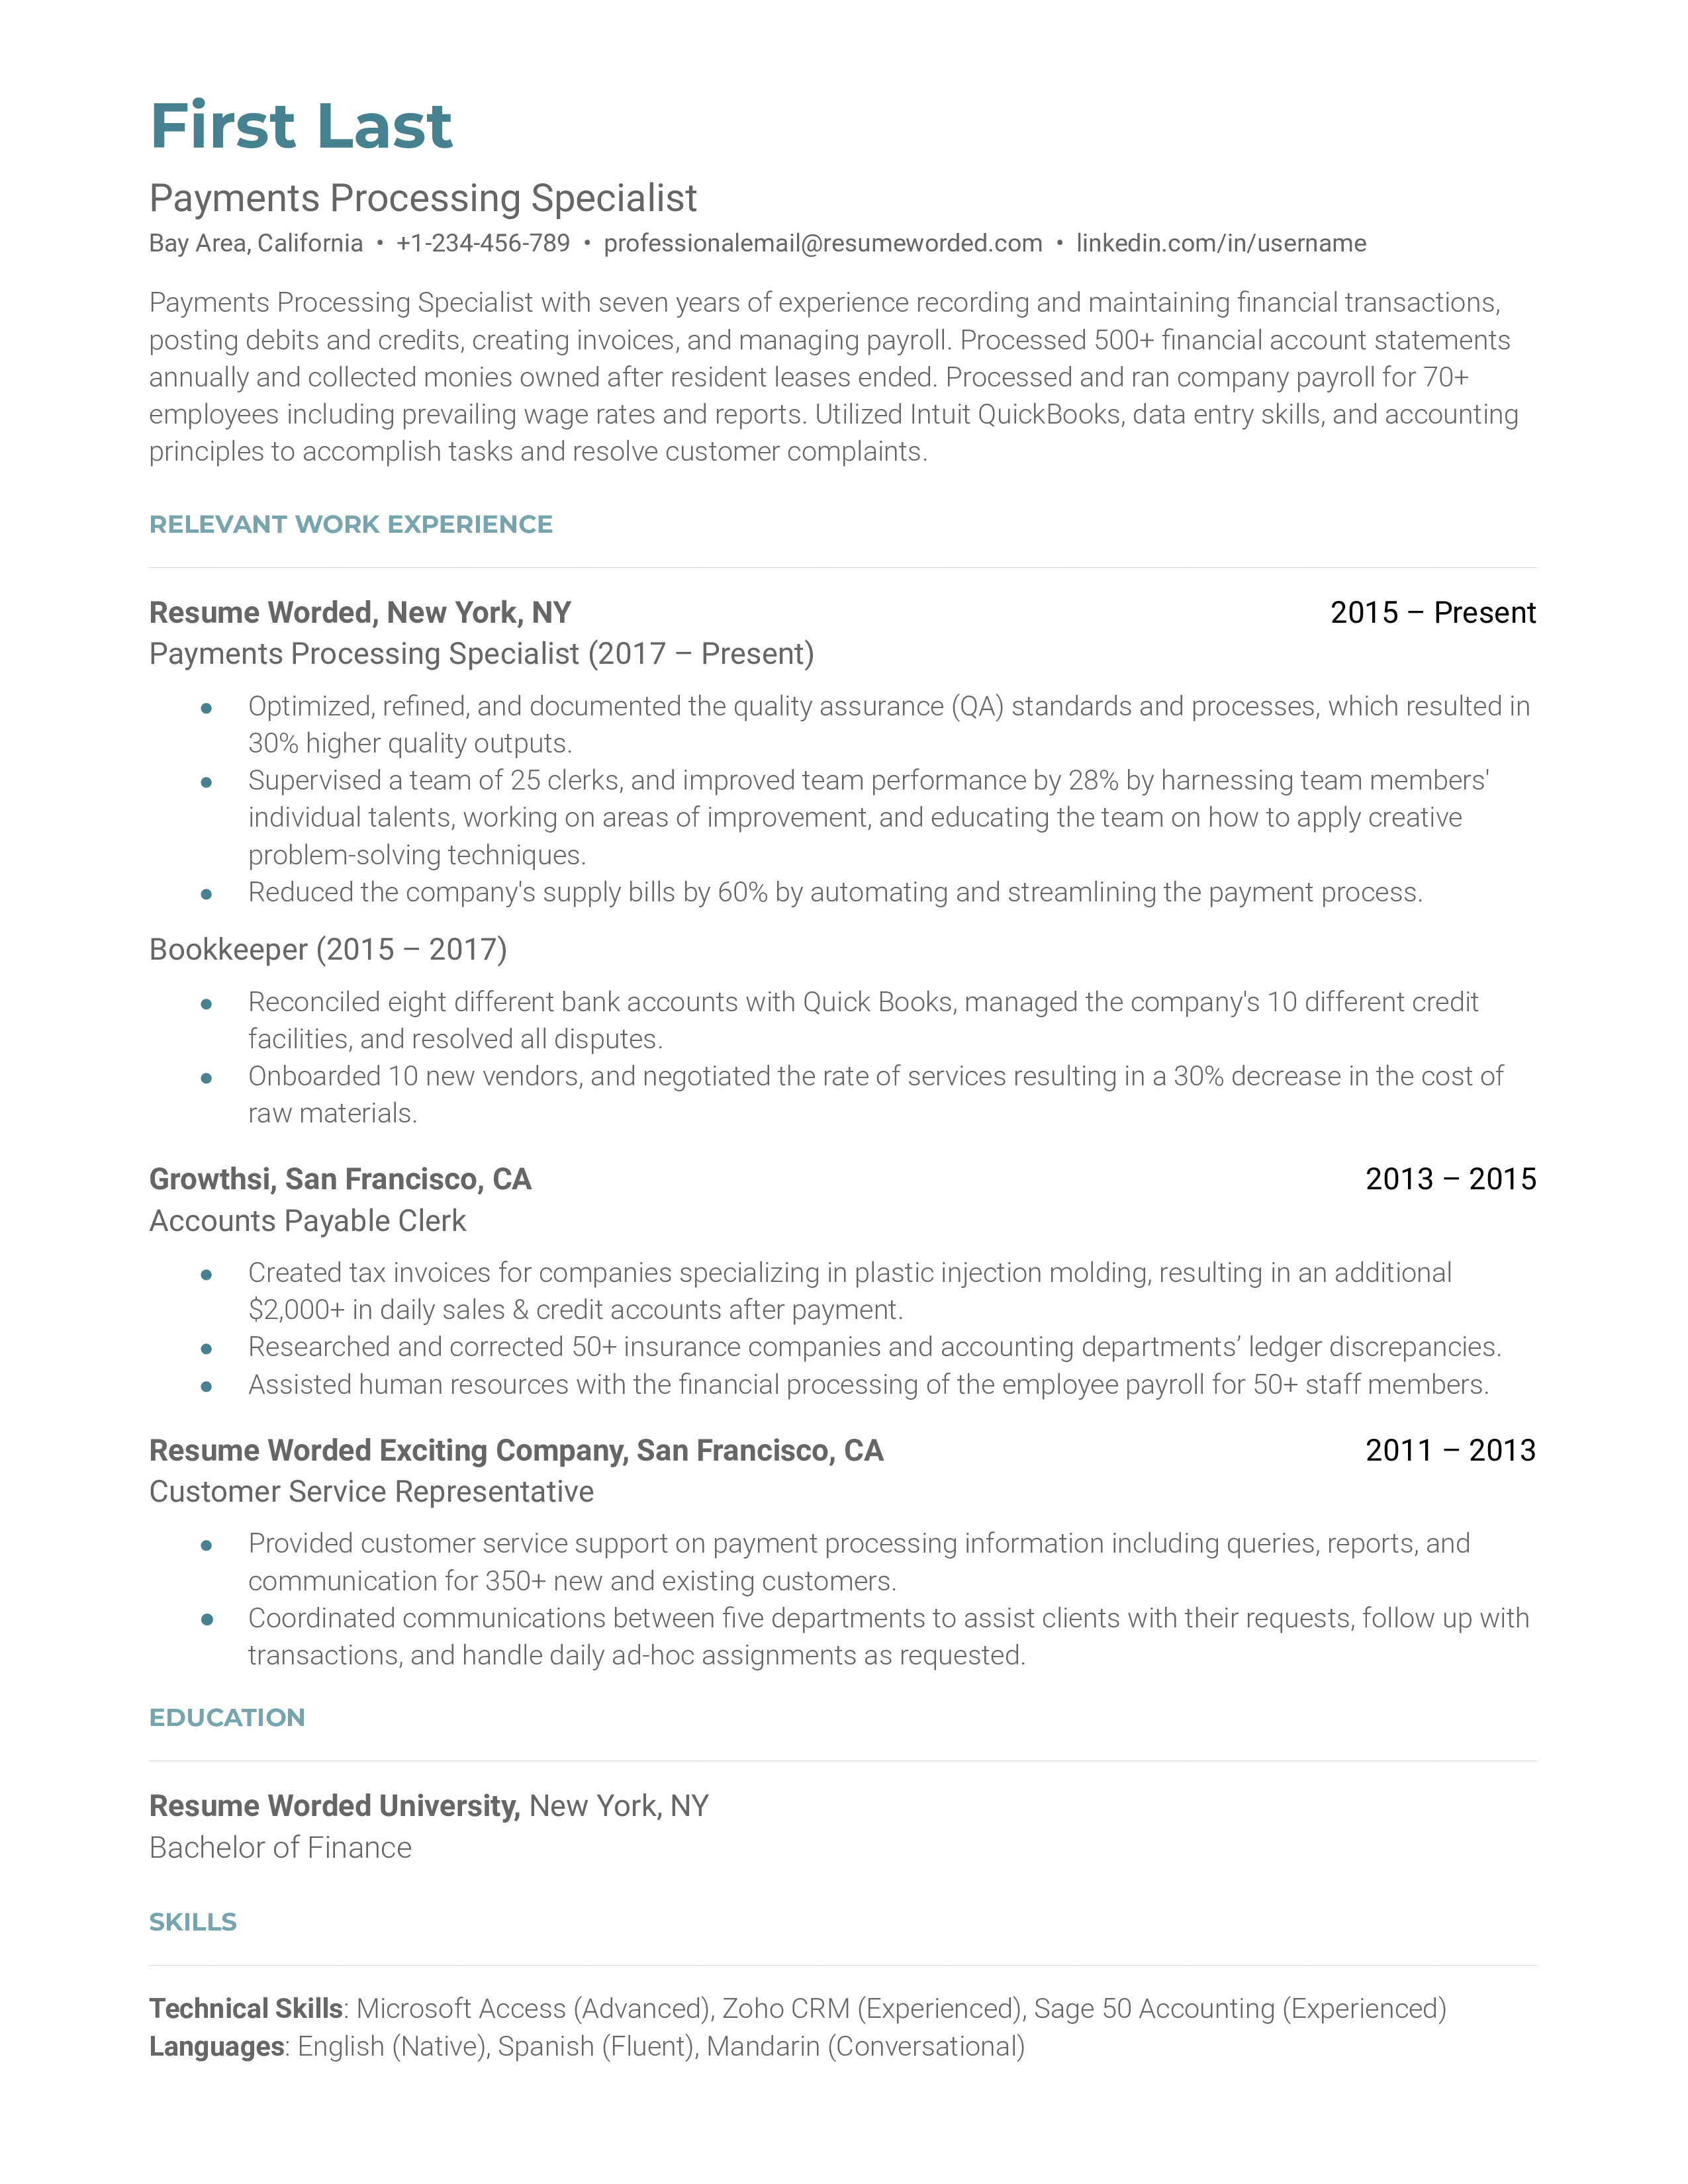 Payments Processing Specialist Resume Sample